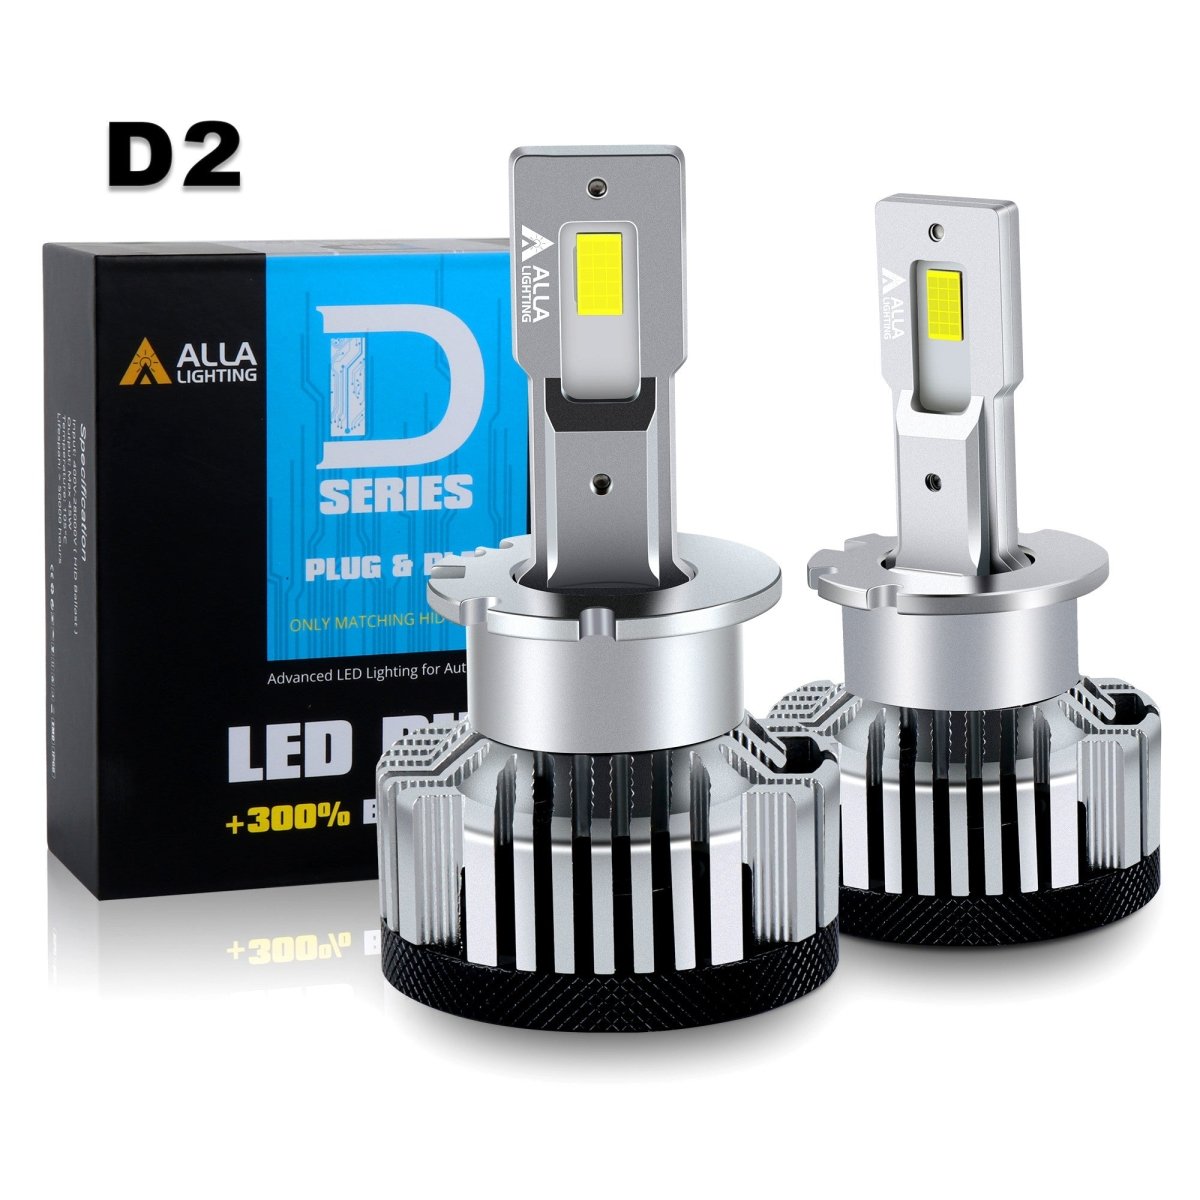 D2S/D2R HID to D2S/D2R LED Conversion Kit - Use Existing Factory HID  Ballasts (OEM) as LED bulb power source